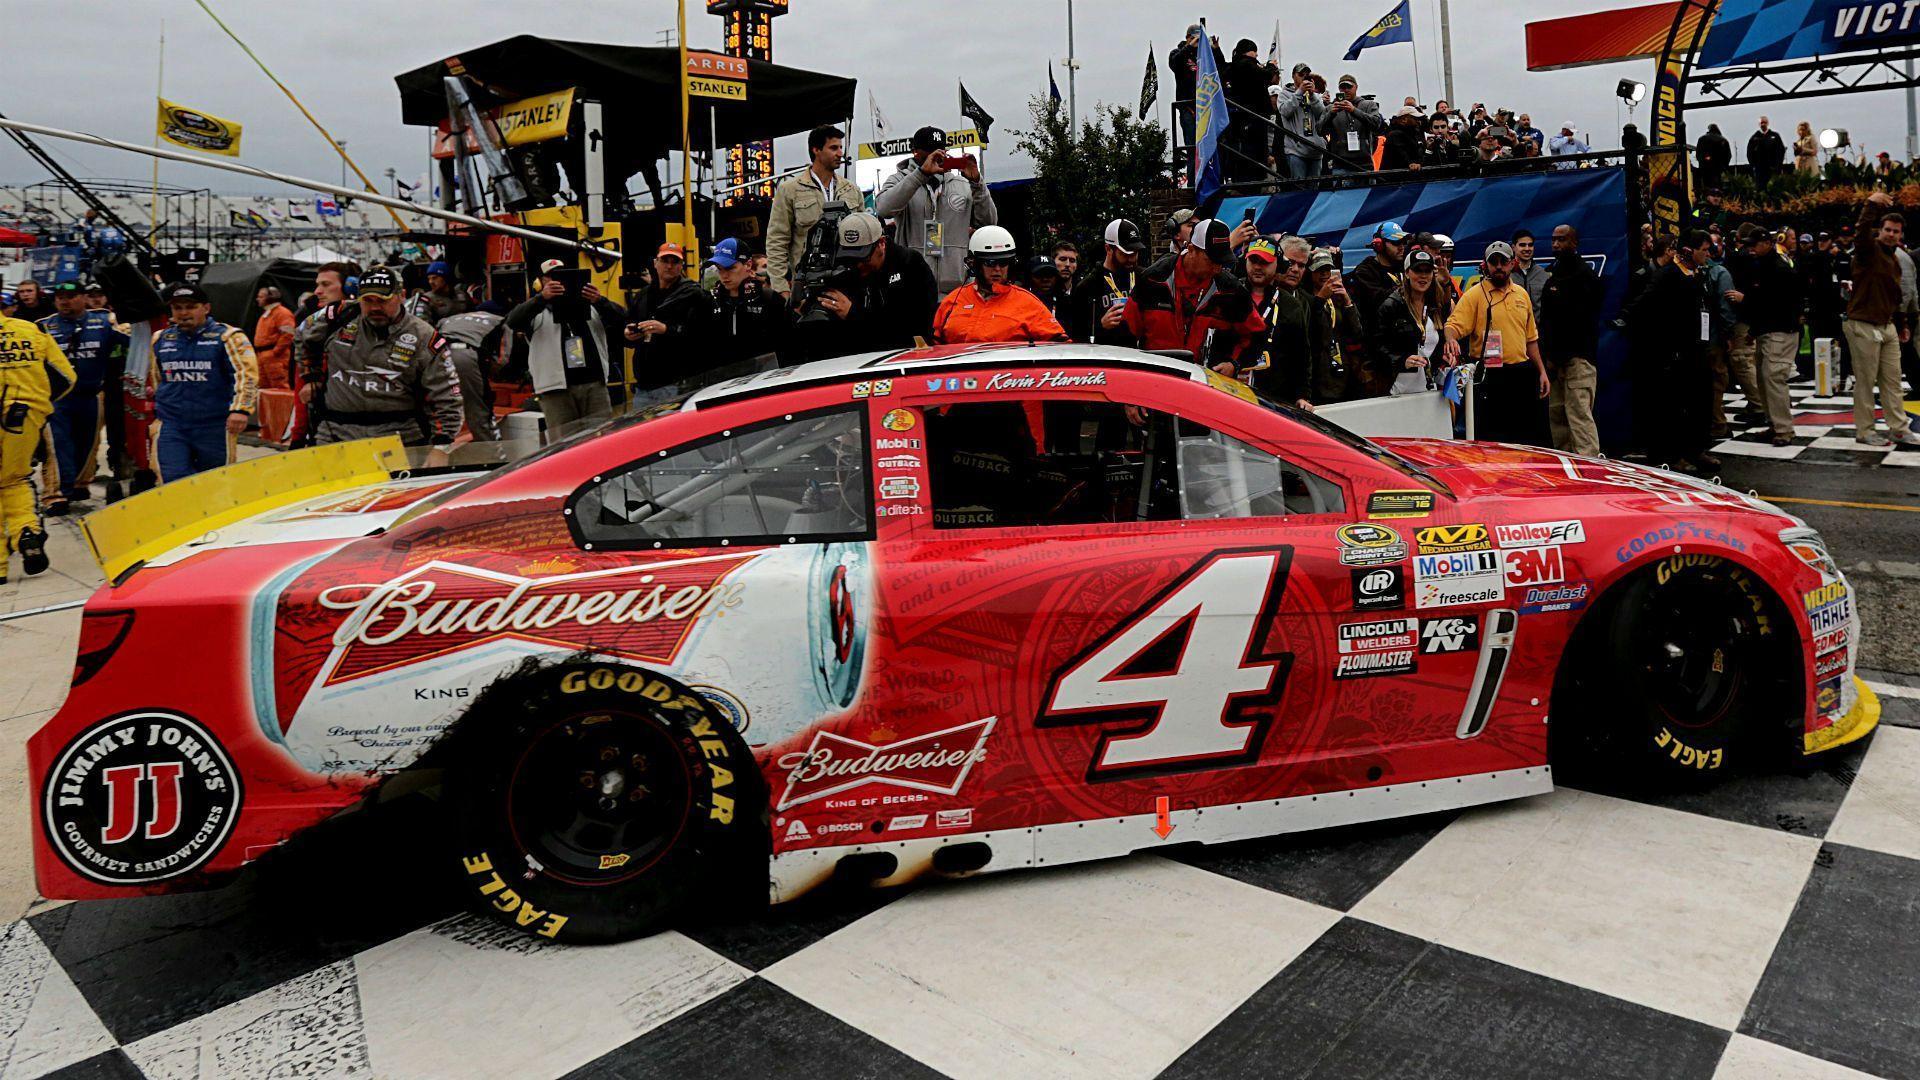 Did Kevin Harvick cheat at Dover? We may never know. NASCAR